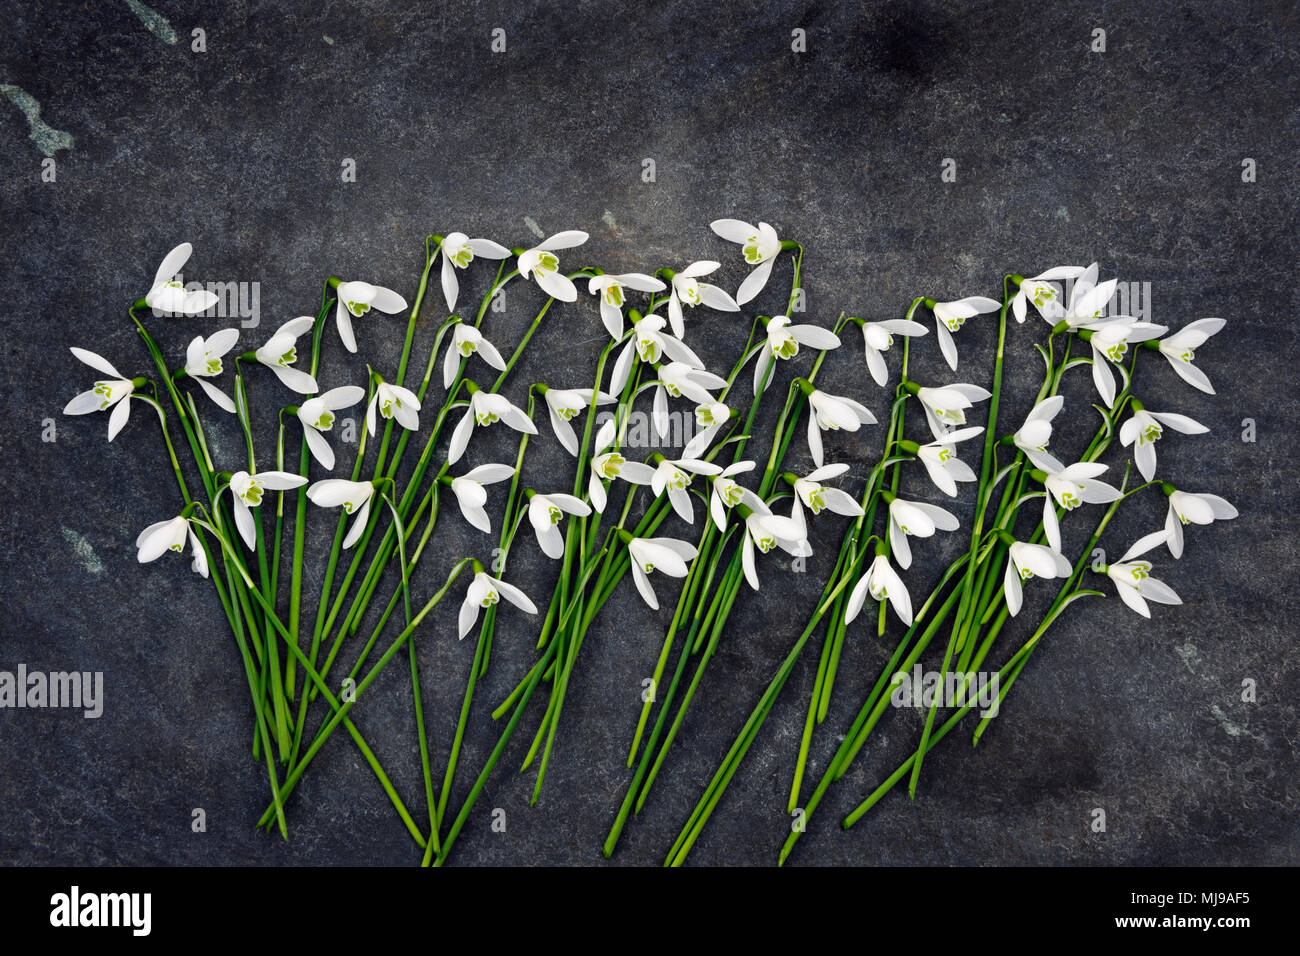 Snowdrops flowers (Galanthus nivalis) picked from garden and scattered on rough slate slab. Stock Photo